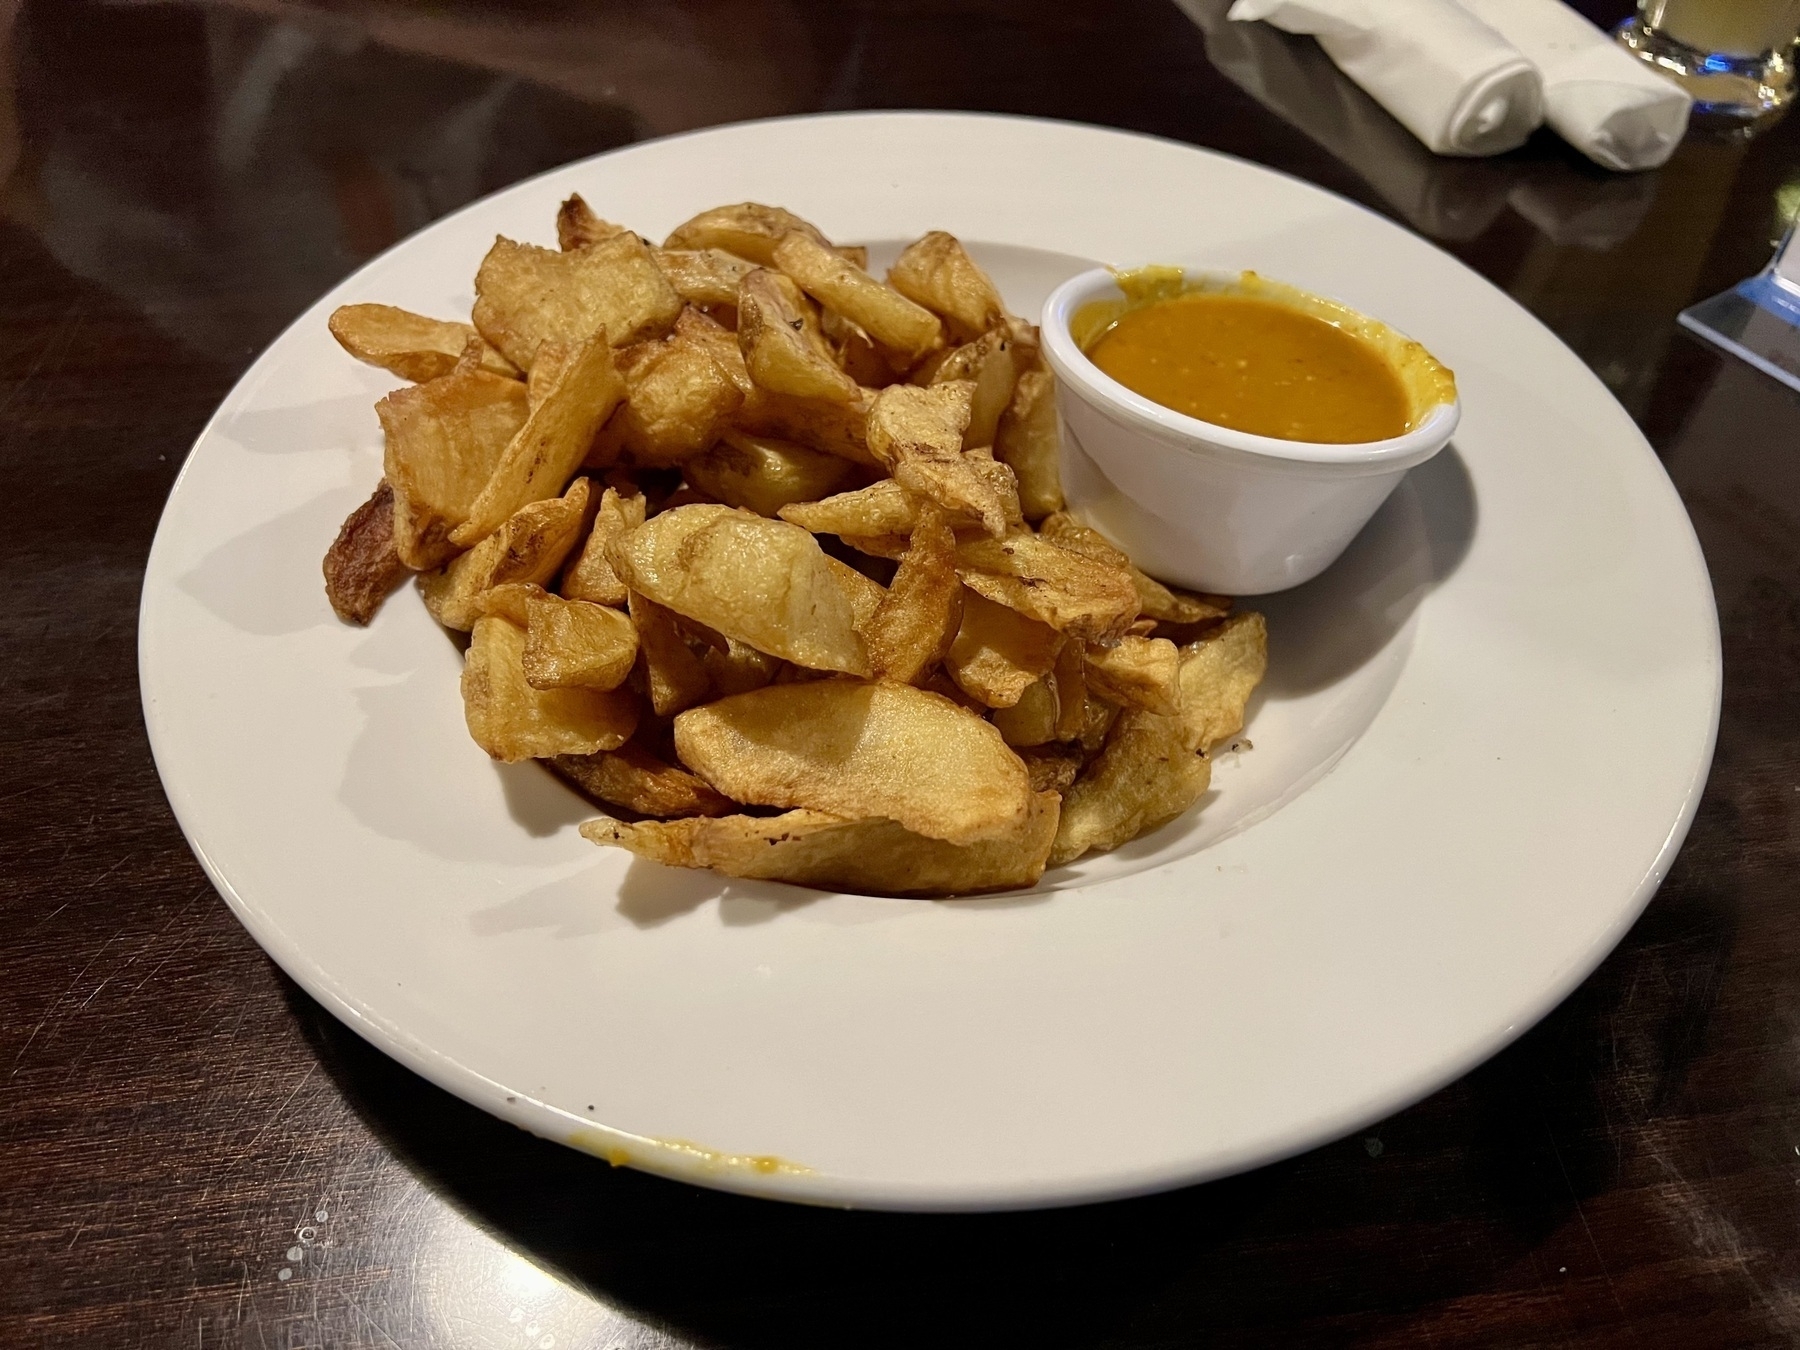 Wedge-shaped fries on a circular white plate, with a yellow-orange curry sauce on the site, in a small ramekin.